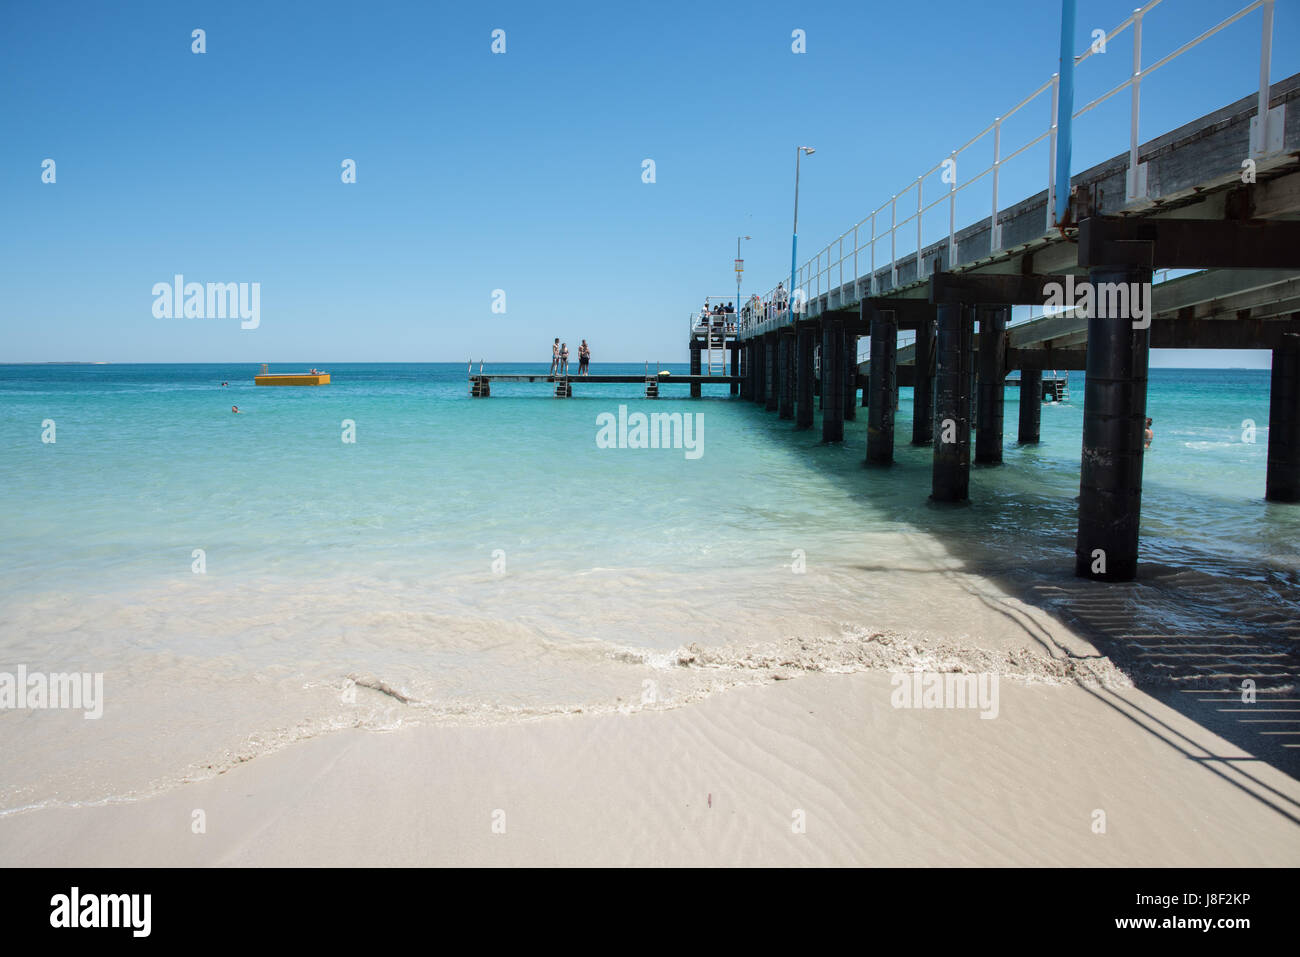 Coogee,WA,Australia-November 14,2016: People on the Coogee Beach jetty with the Indian Ocean seascape in Coogee, Western Australia. Stock Photo